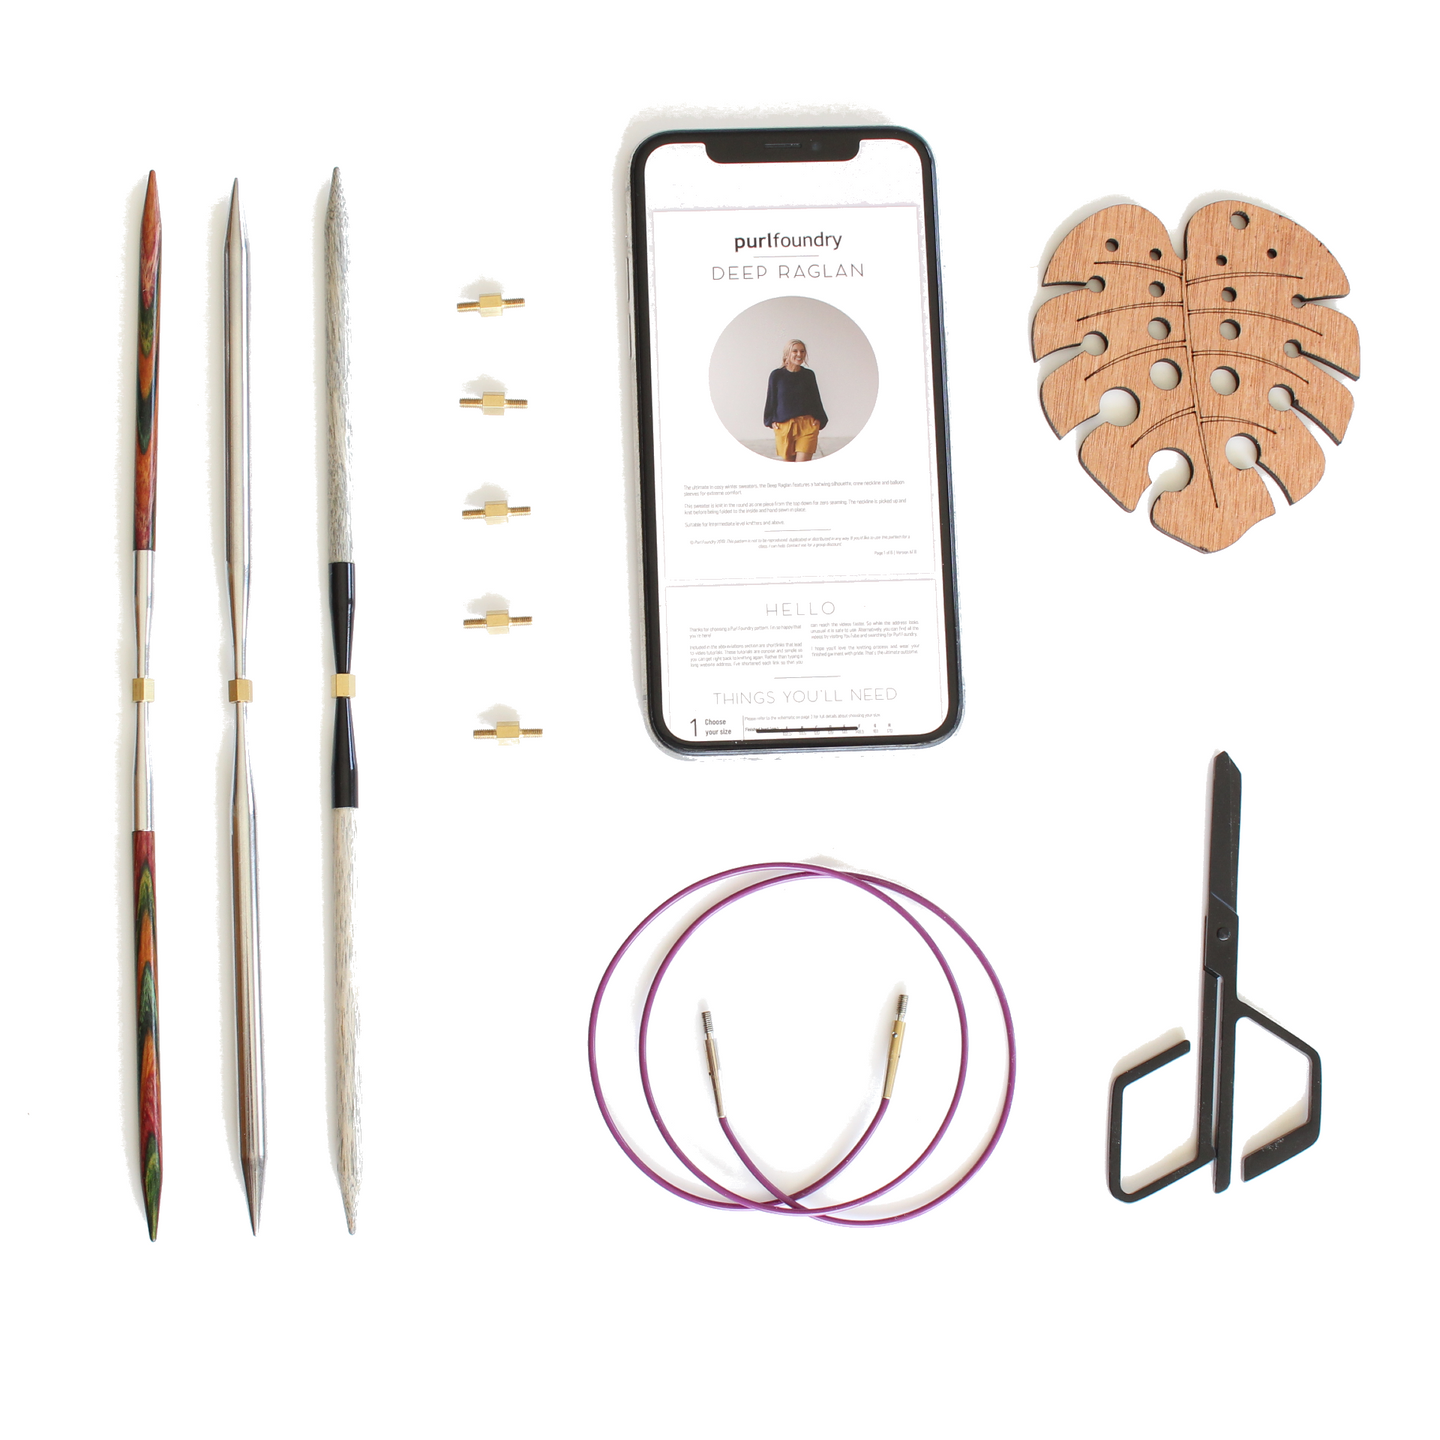 A flatlay of knitting tools eg needle tips, scissors, needle gauge, cord and a PDF pattern on a mobile phone